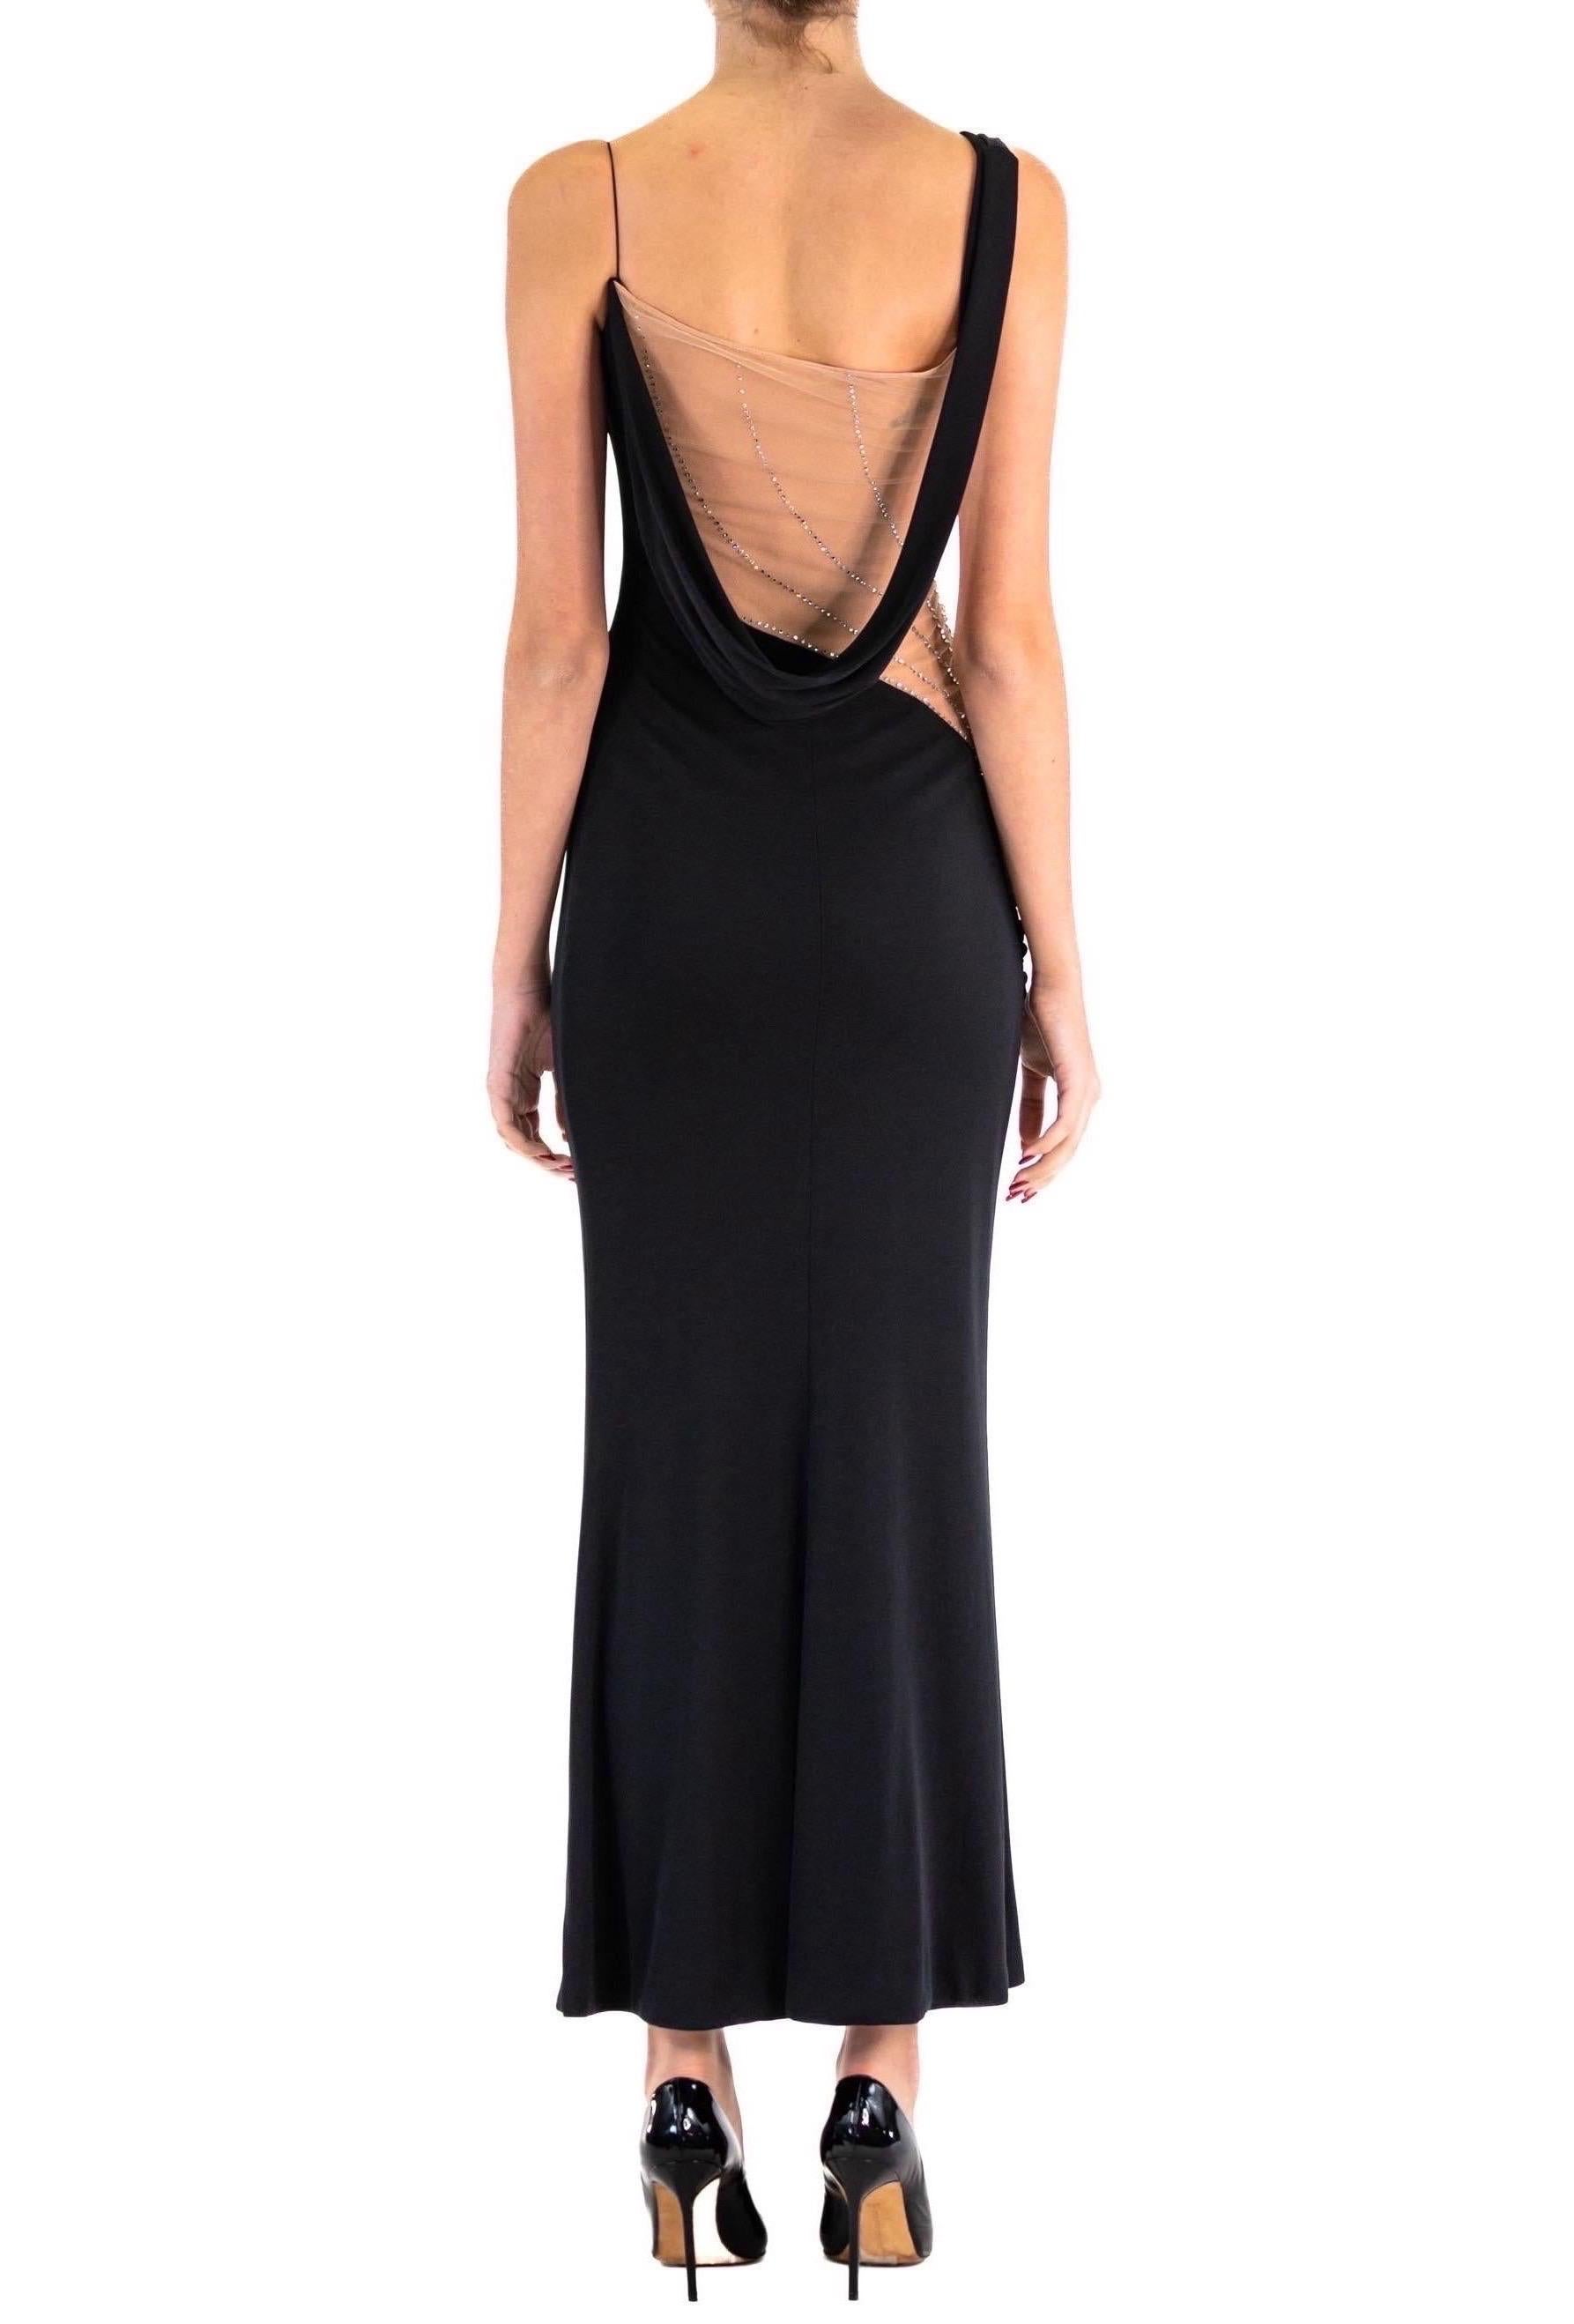 2000S JIKI Black Slinky Rayon Jersey One Shoulder Gown With Crystal Studded Nud For Sale 4